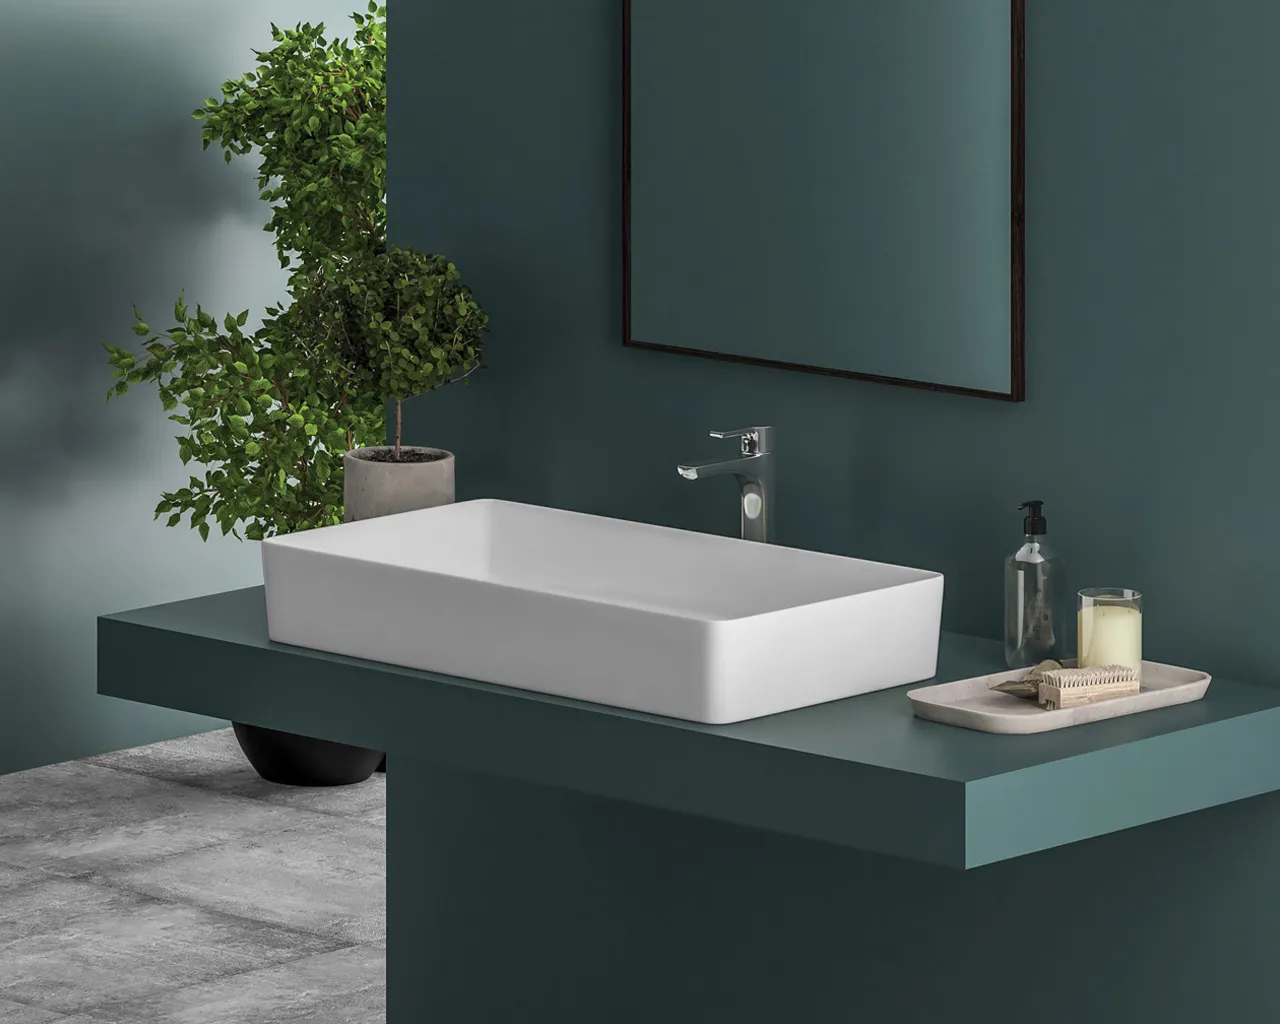 Washbasin Manufacturer And Supplier In India